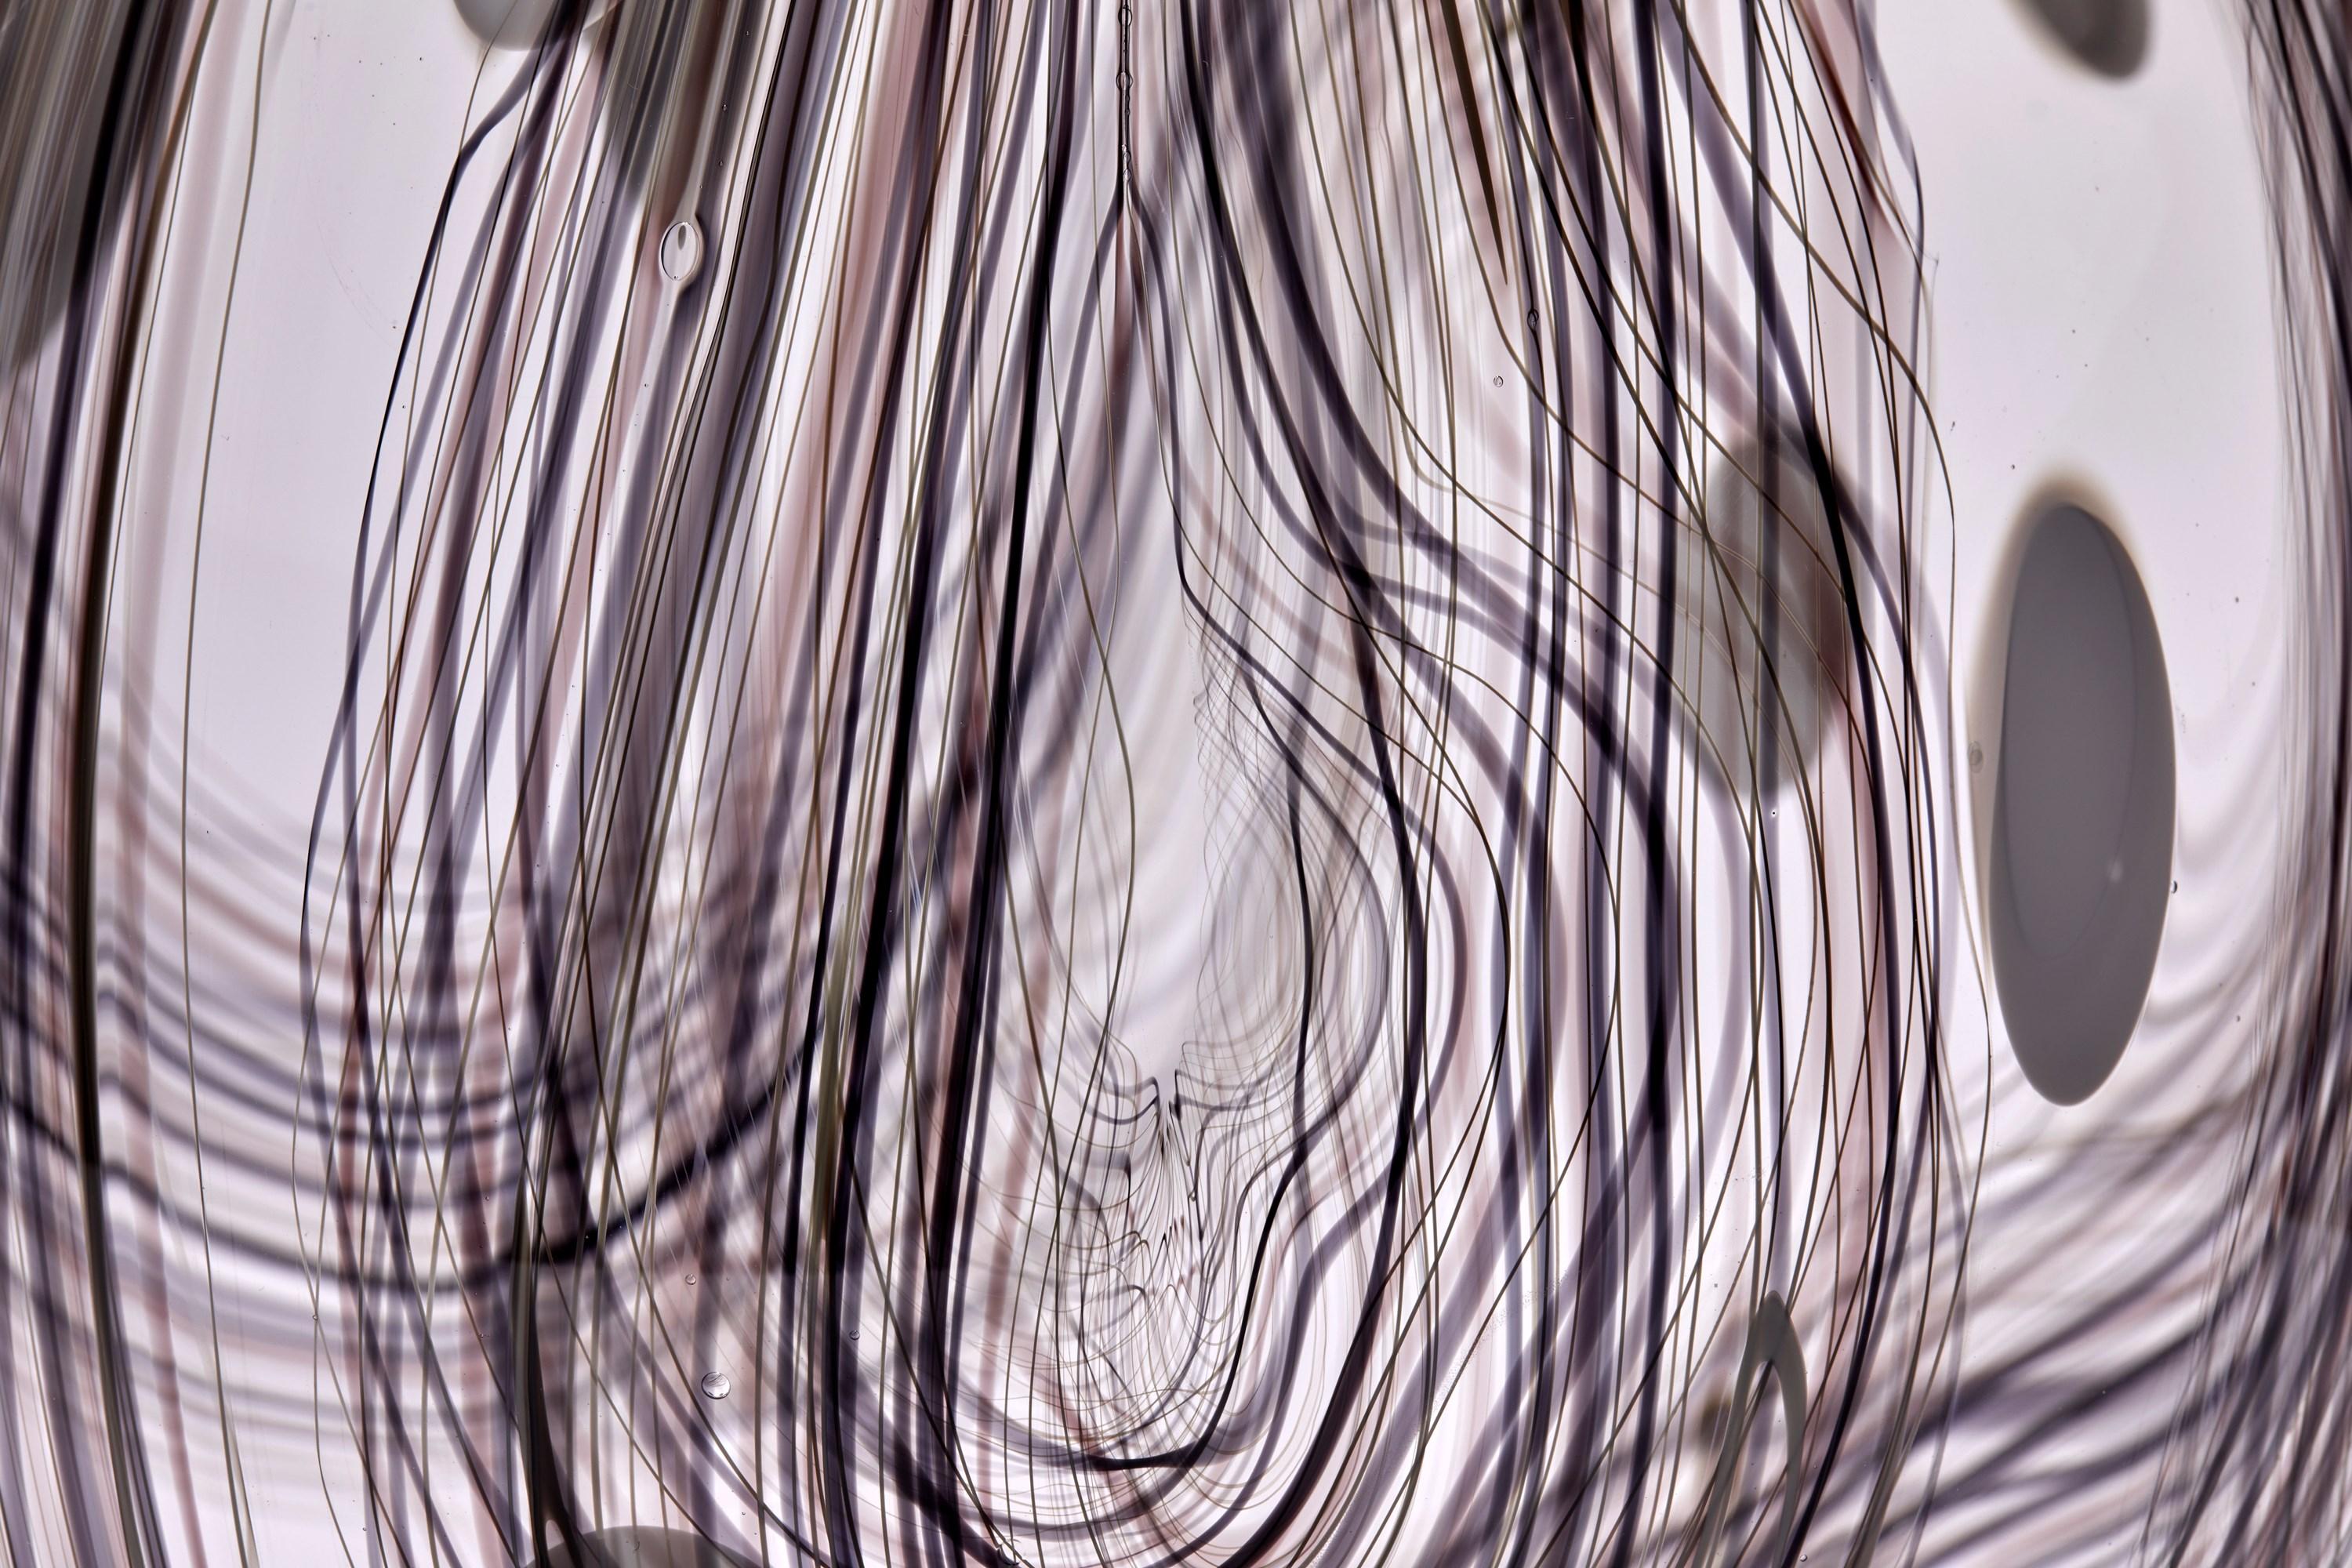 Hand-Crafted Threads iii, a White, Clear & Dark Purple Abstract Glass Vessel by Ann Wåhlström For Sale